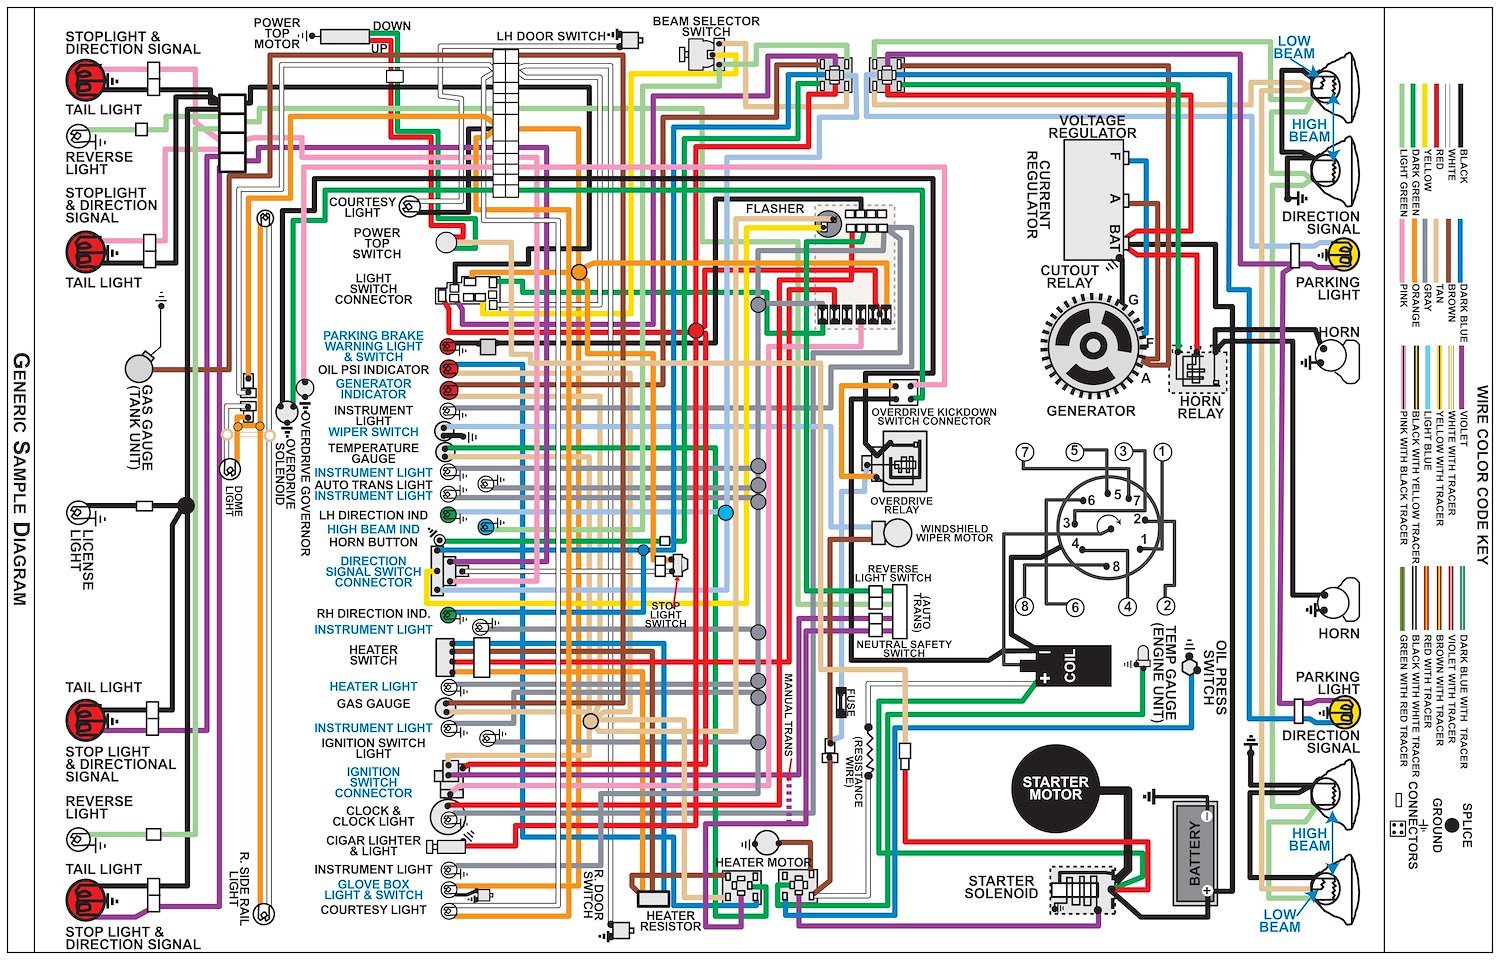 Wiring Diagram for 1970 Dodge Coronet Super Bee with Rallye Dash, 11 in x 17 in., Laminated